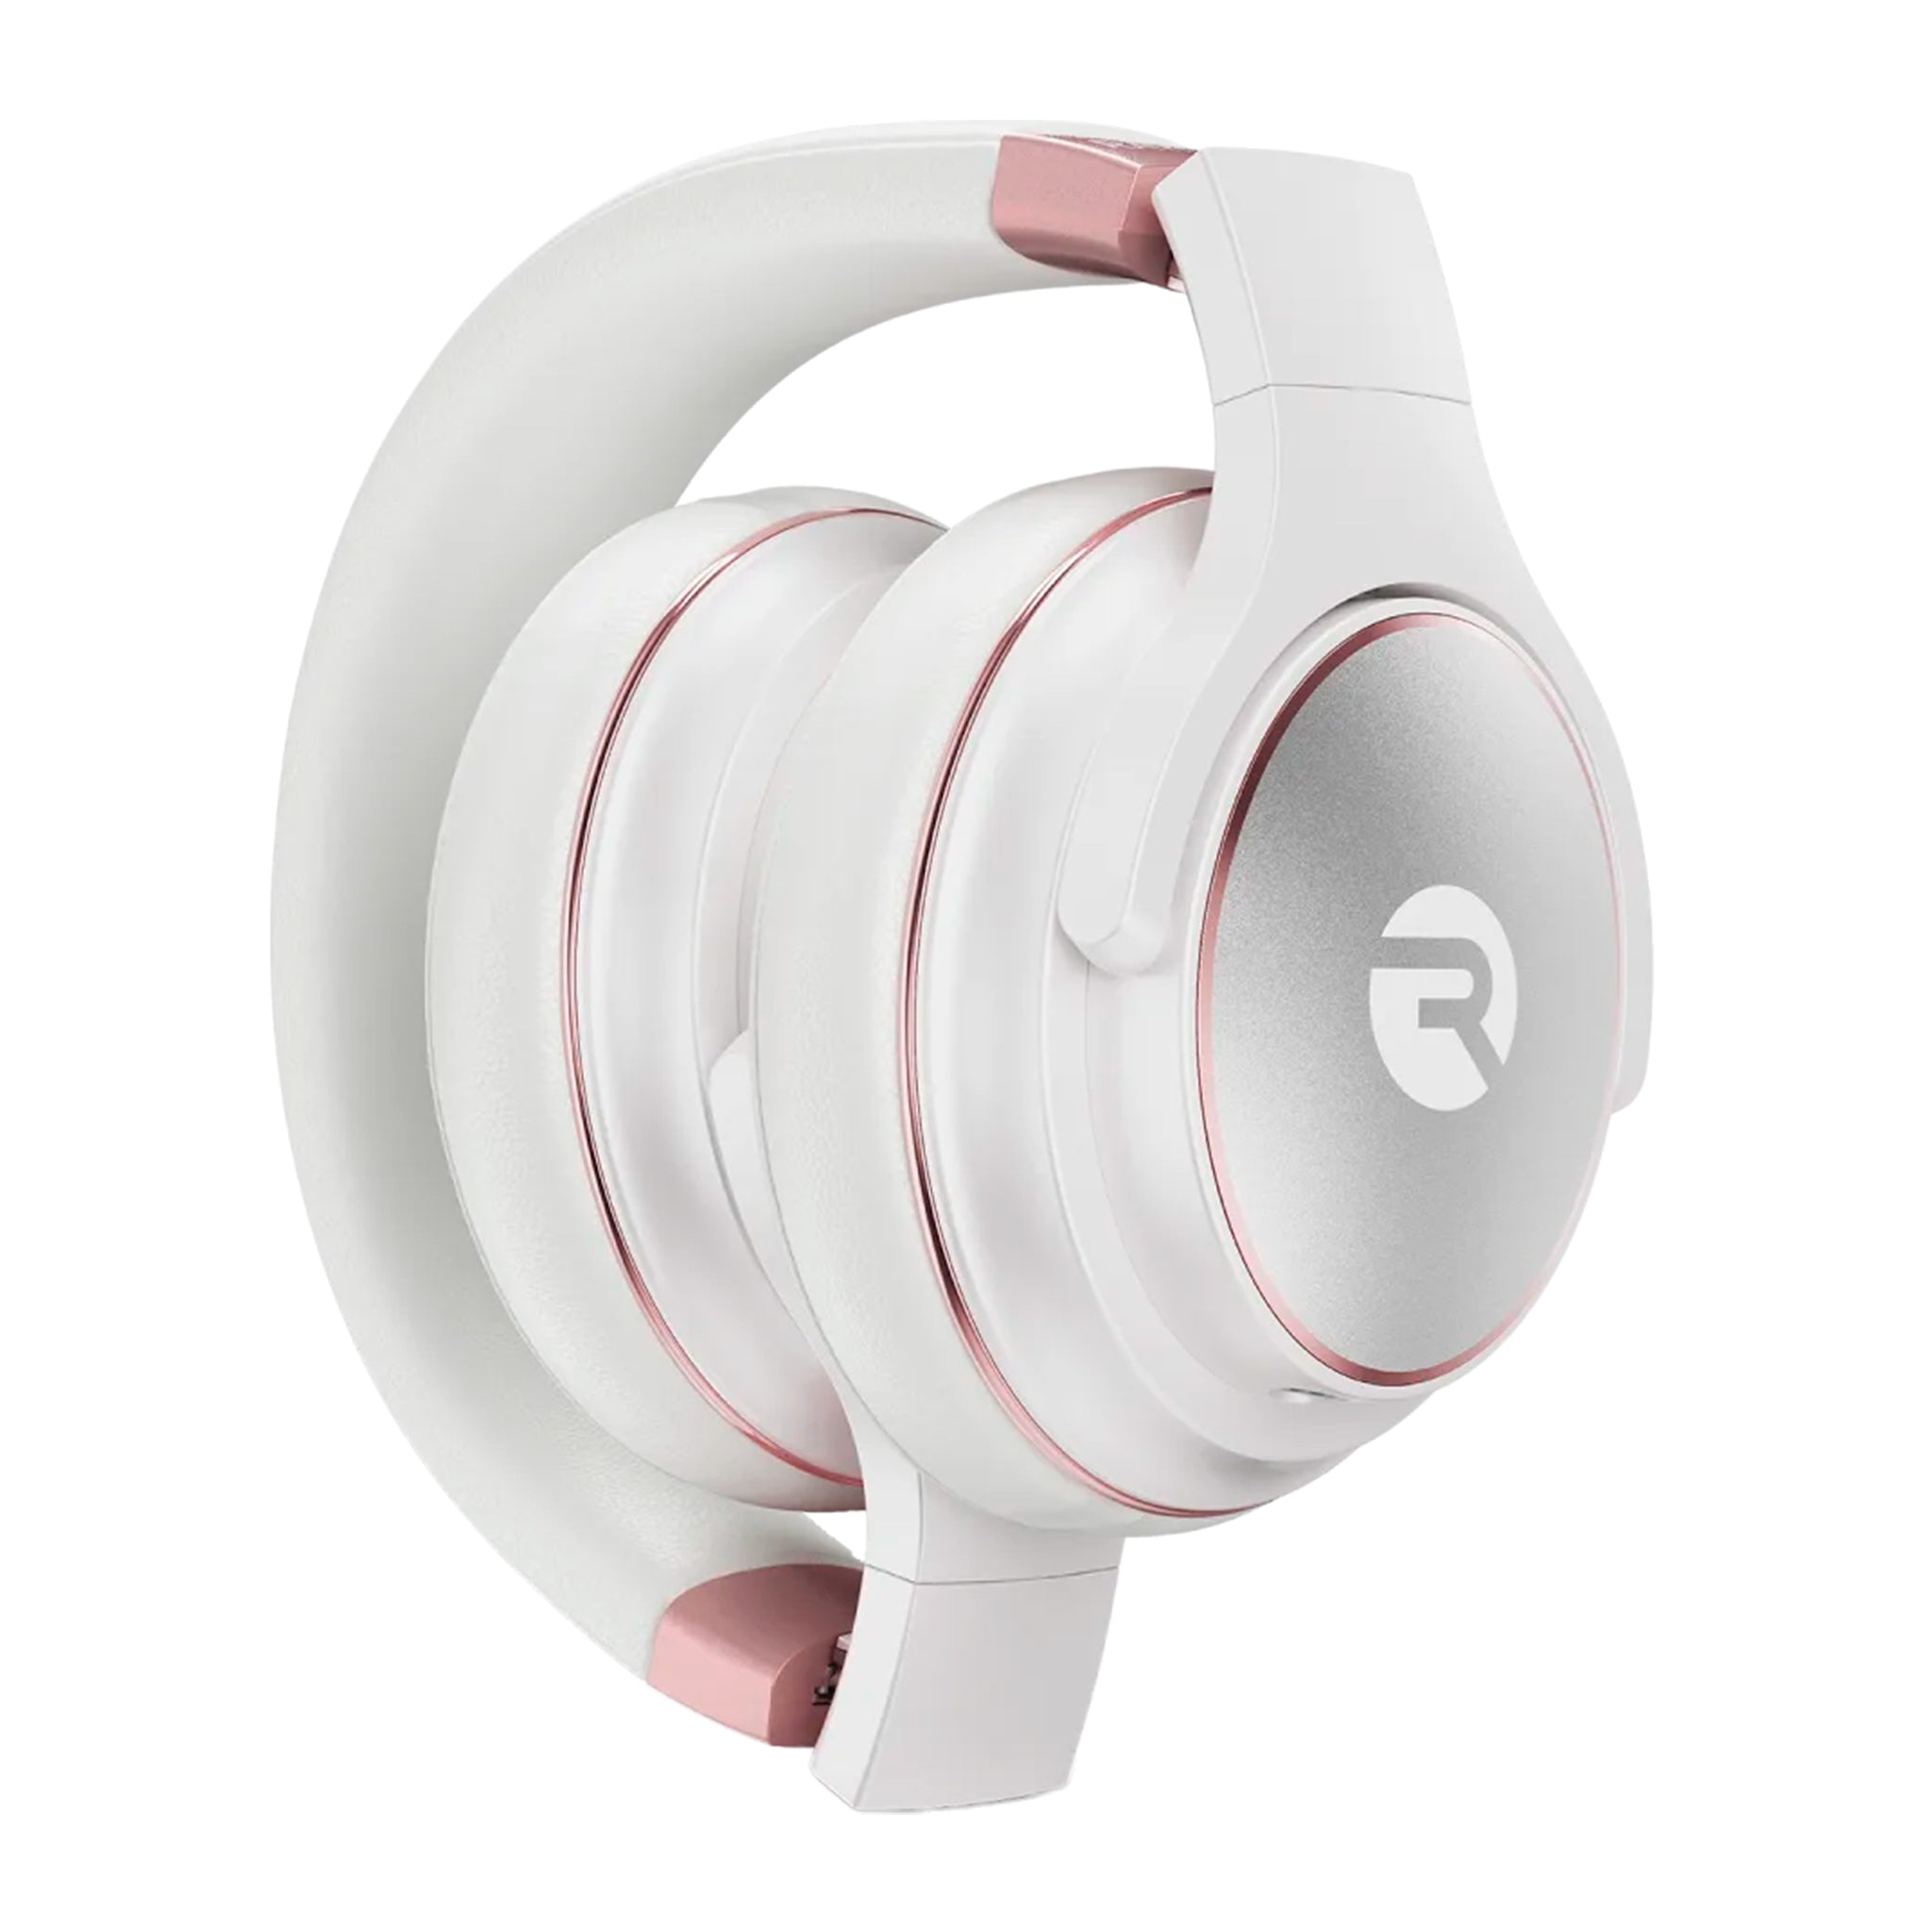 Raycon - The Everyday Over Ear Wireless Headphones - Rose Gold